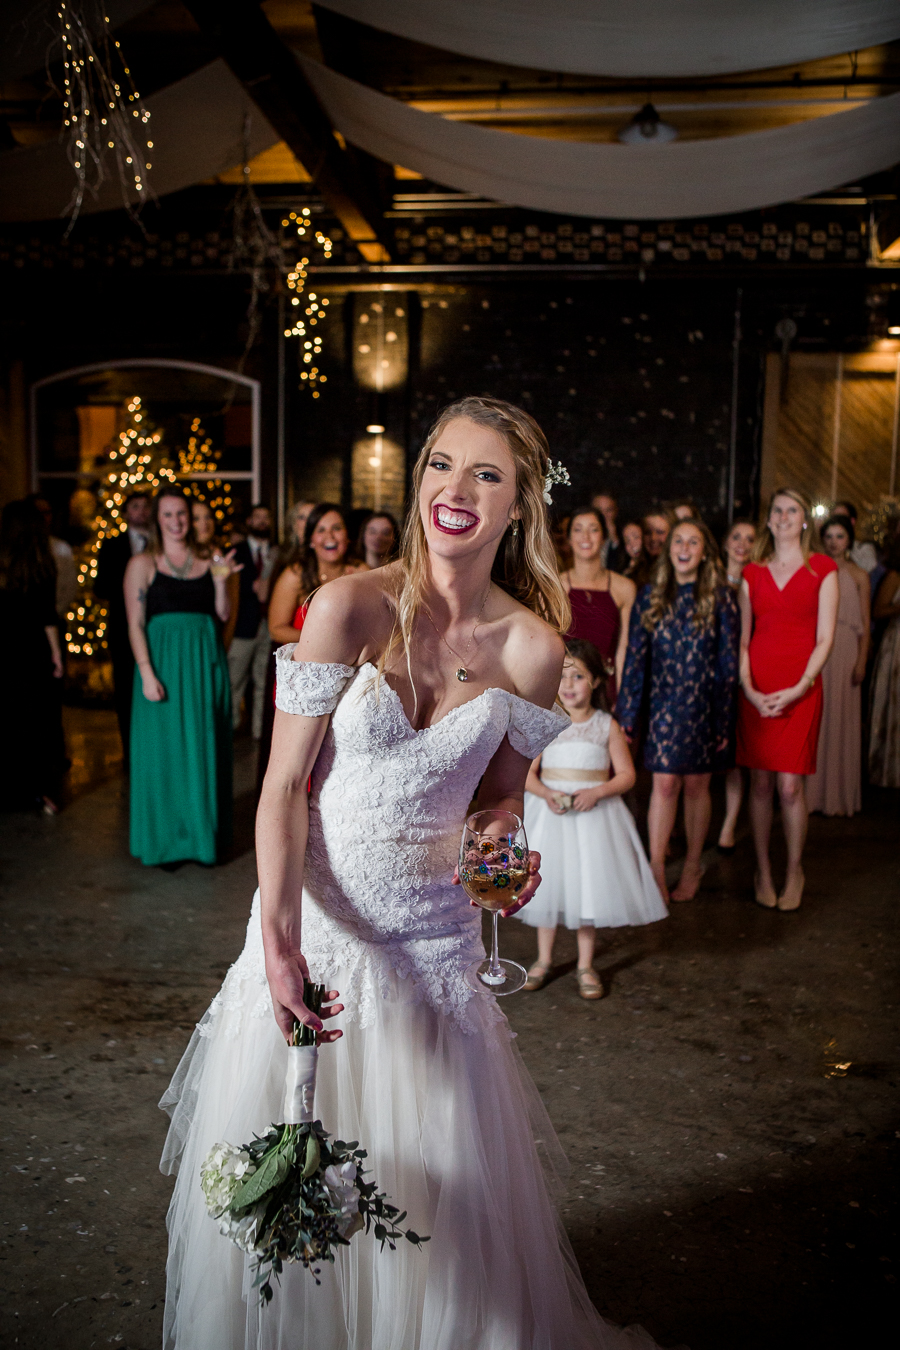 Bouquet toss during the reception pictures at this winter wedding at Knoxville Wedding Venue, Jackson Terminal, by Knoxville Wedding Photographer, Amanda May Photos.